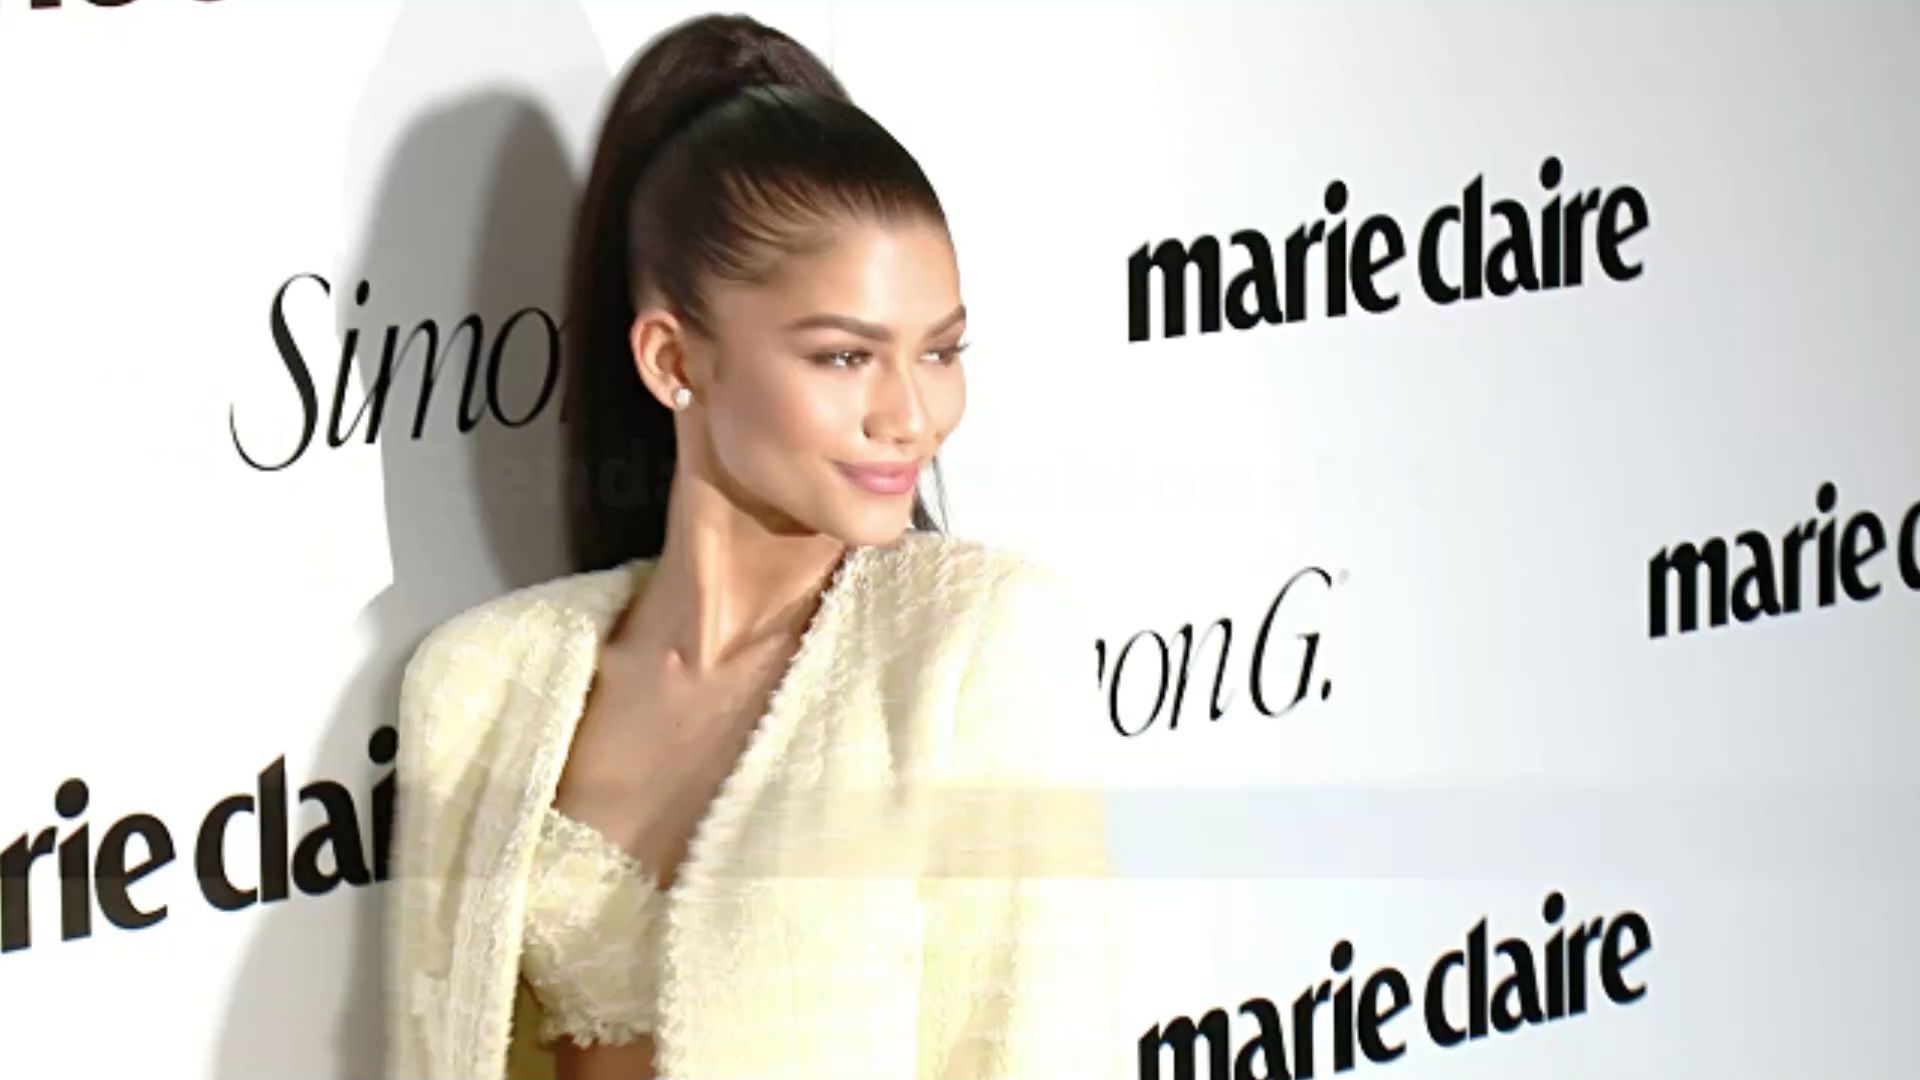 These are the most beautiful looks from actress Zendaya